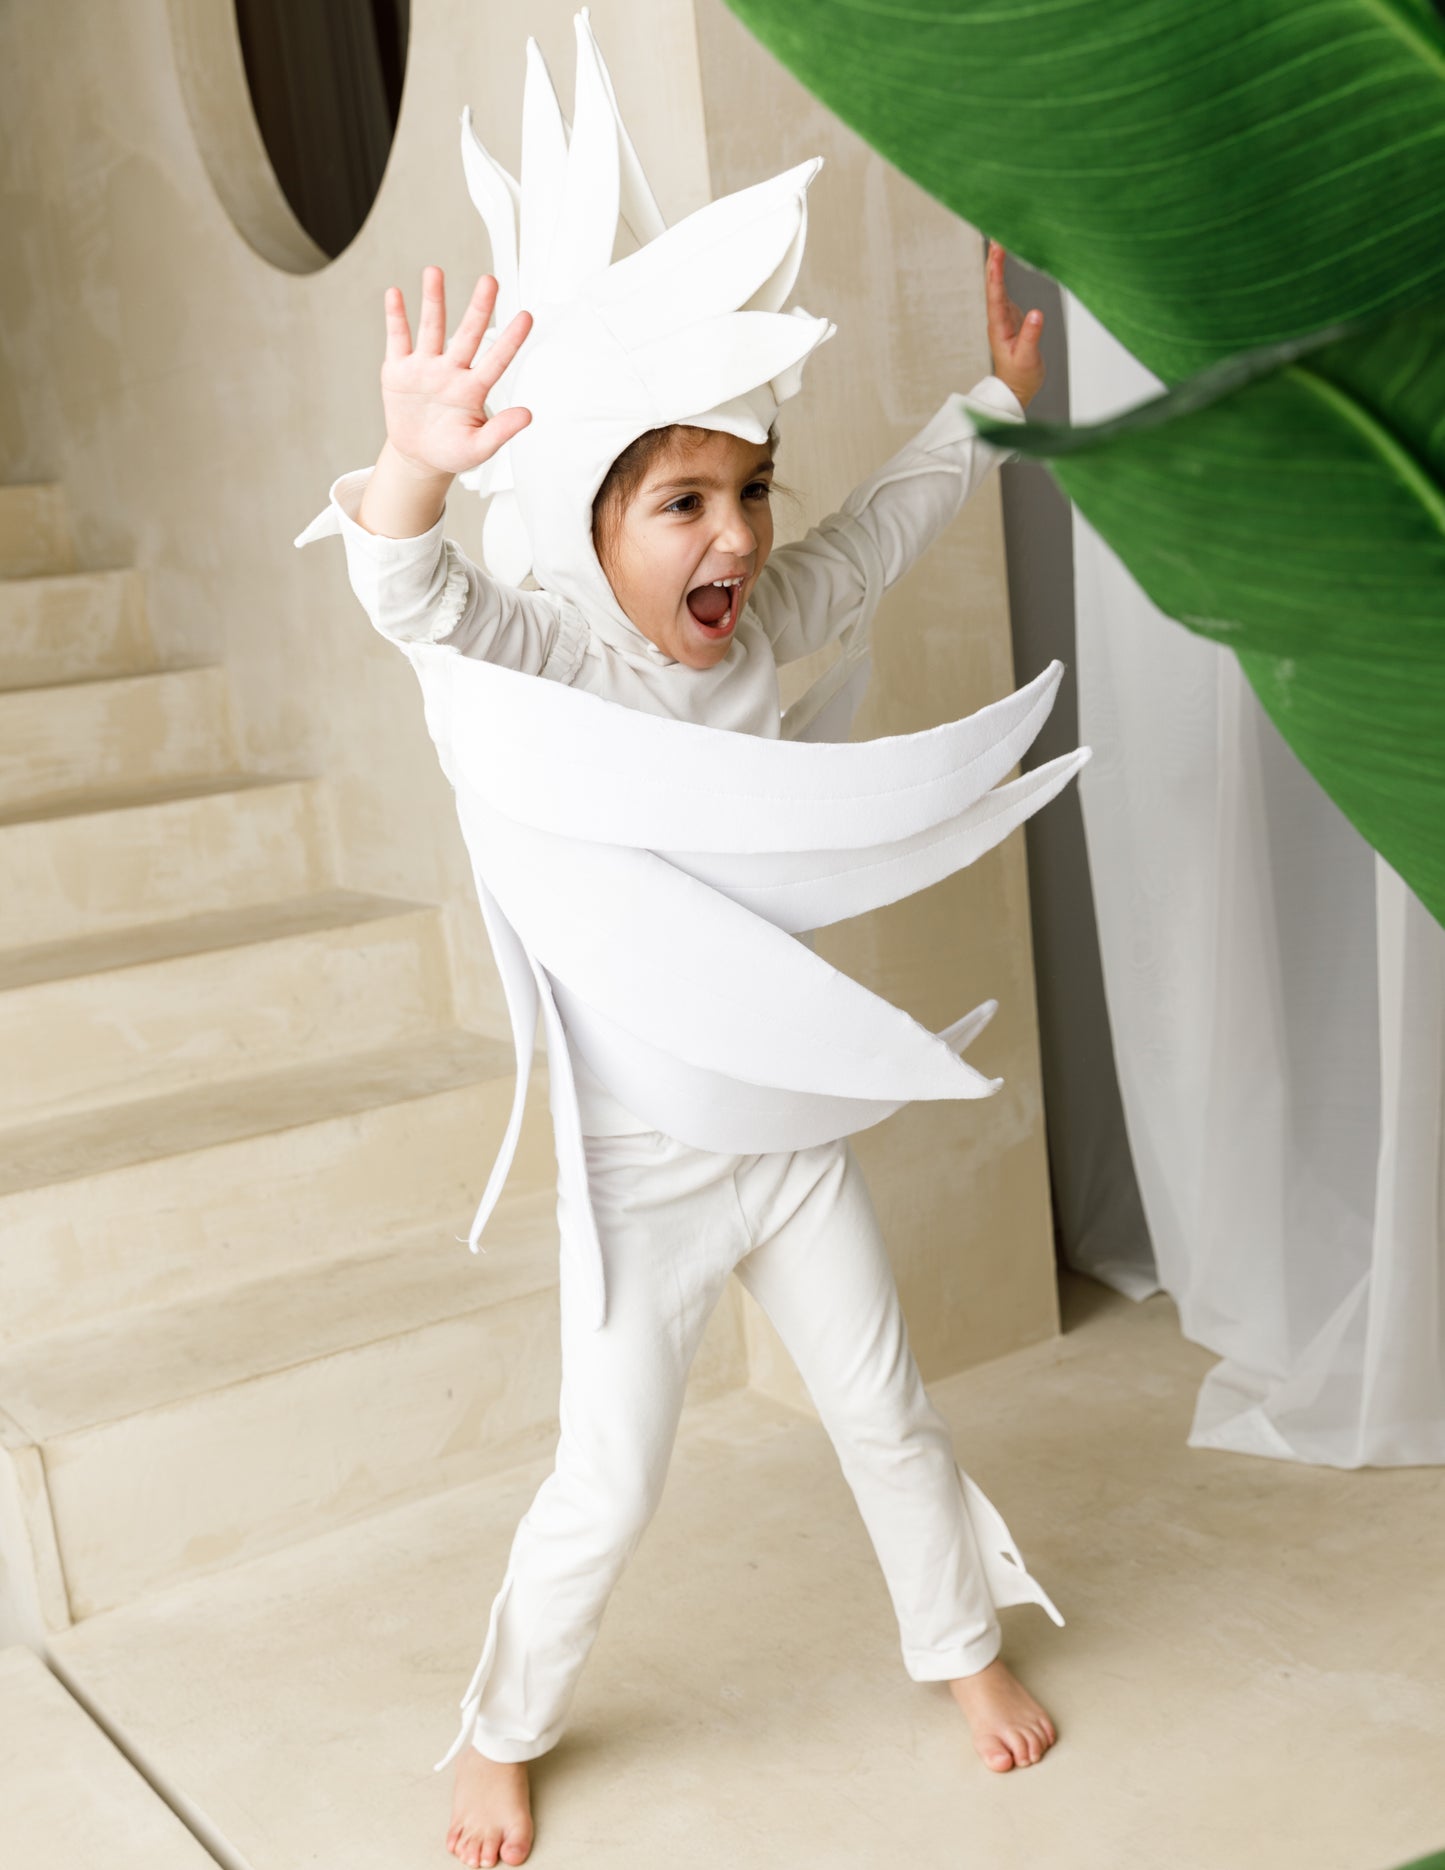 White bird costume, pajama costume for kids, eco-friendly, environmentally friendly costumes, halloween costumes for kids.